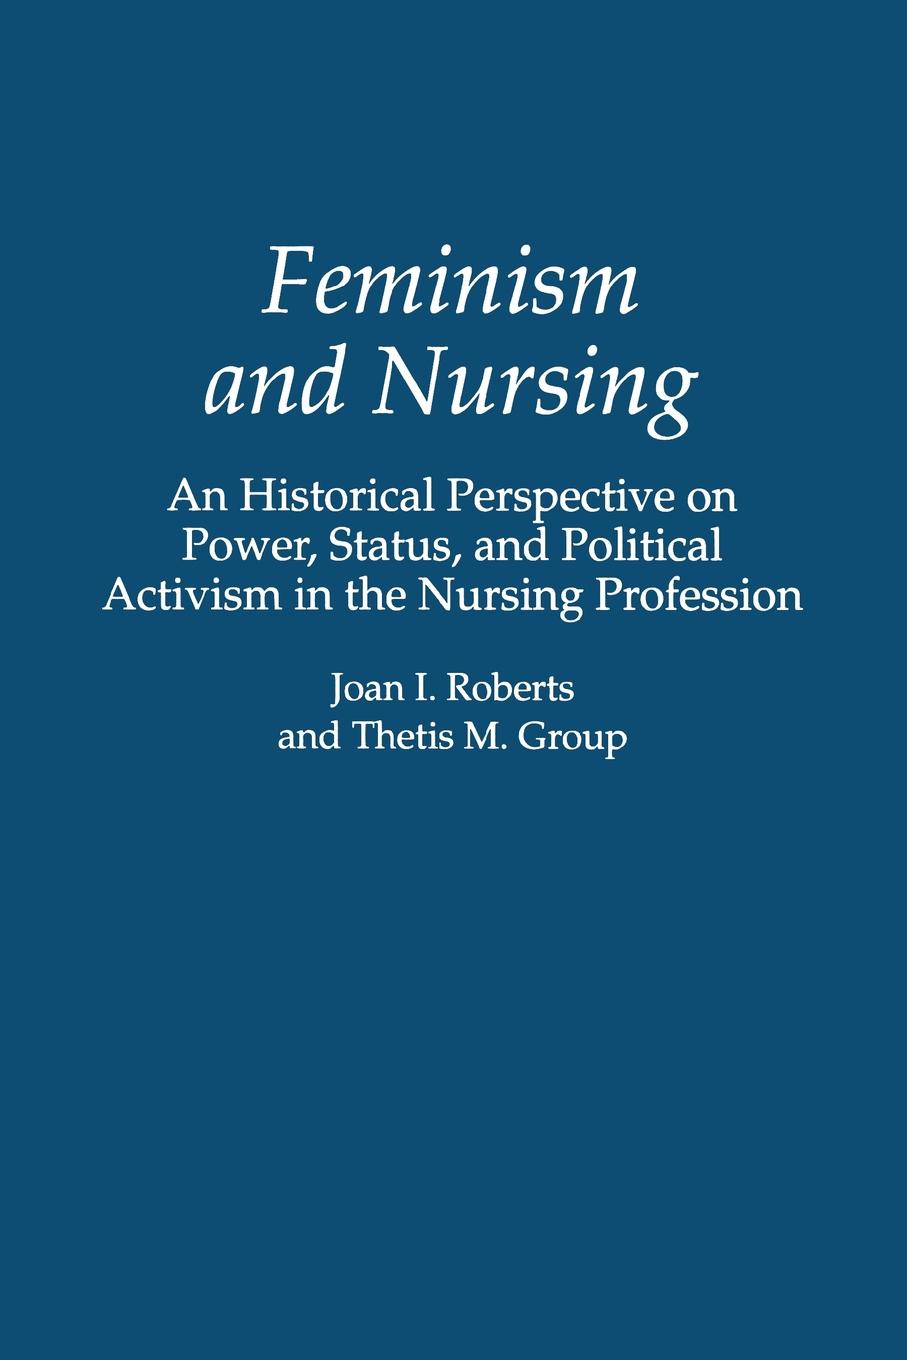 Feminism and Nursing. An Historical Perspective on Power, Status, and Political Activism in the Nursing Profession